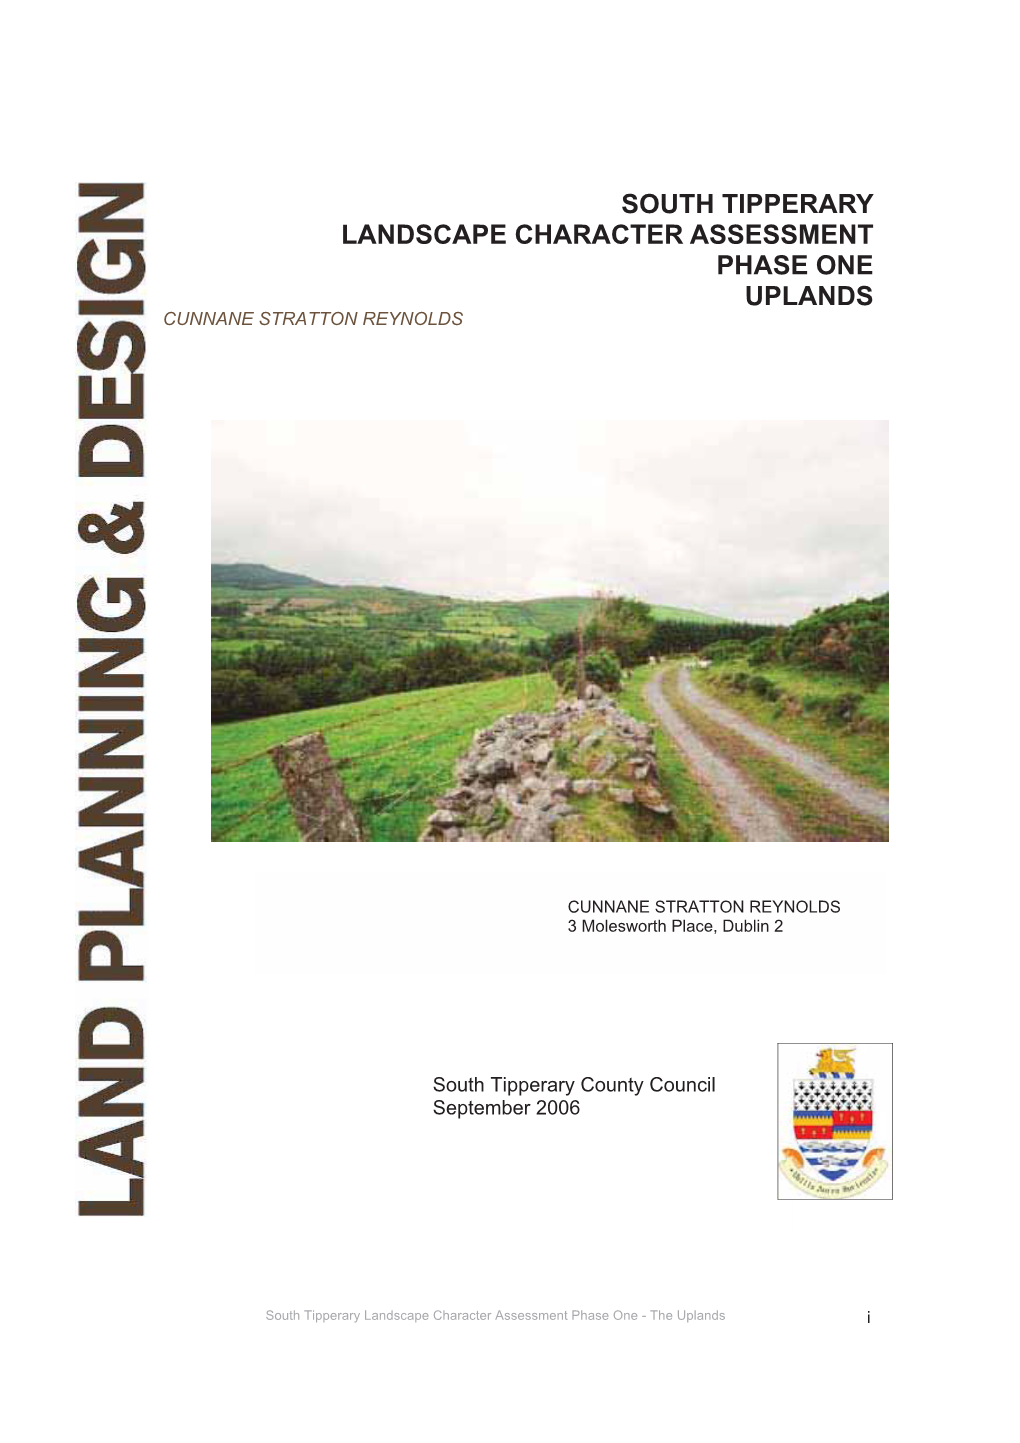 South Tipperary Landscape Character Assessment Phase One Uplands Cunnane Stratton Reynolds